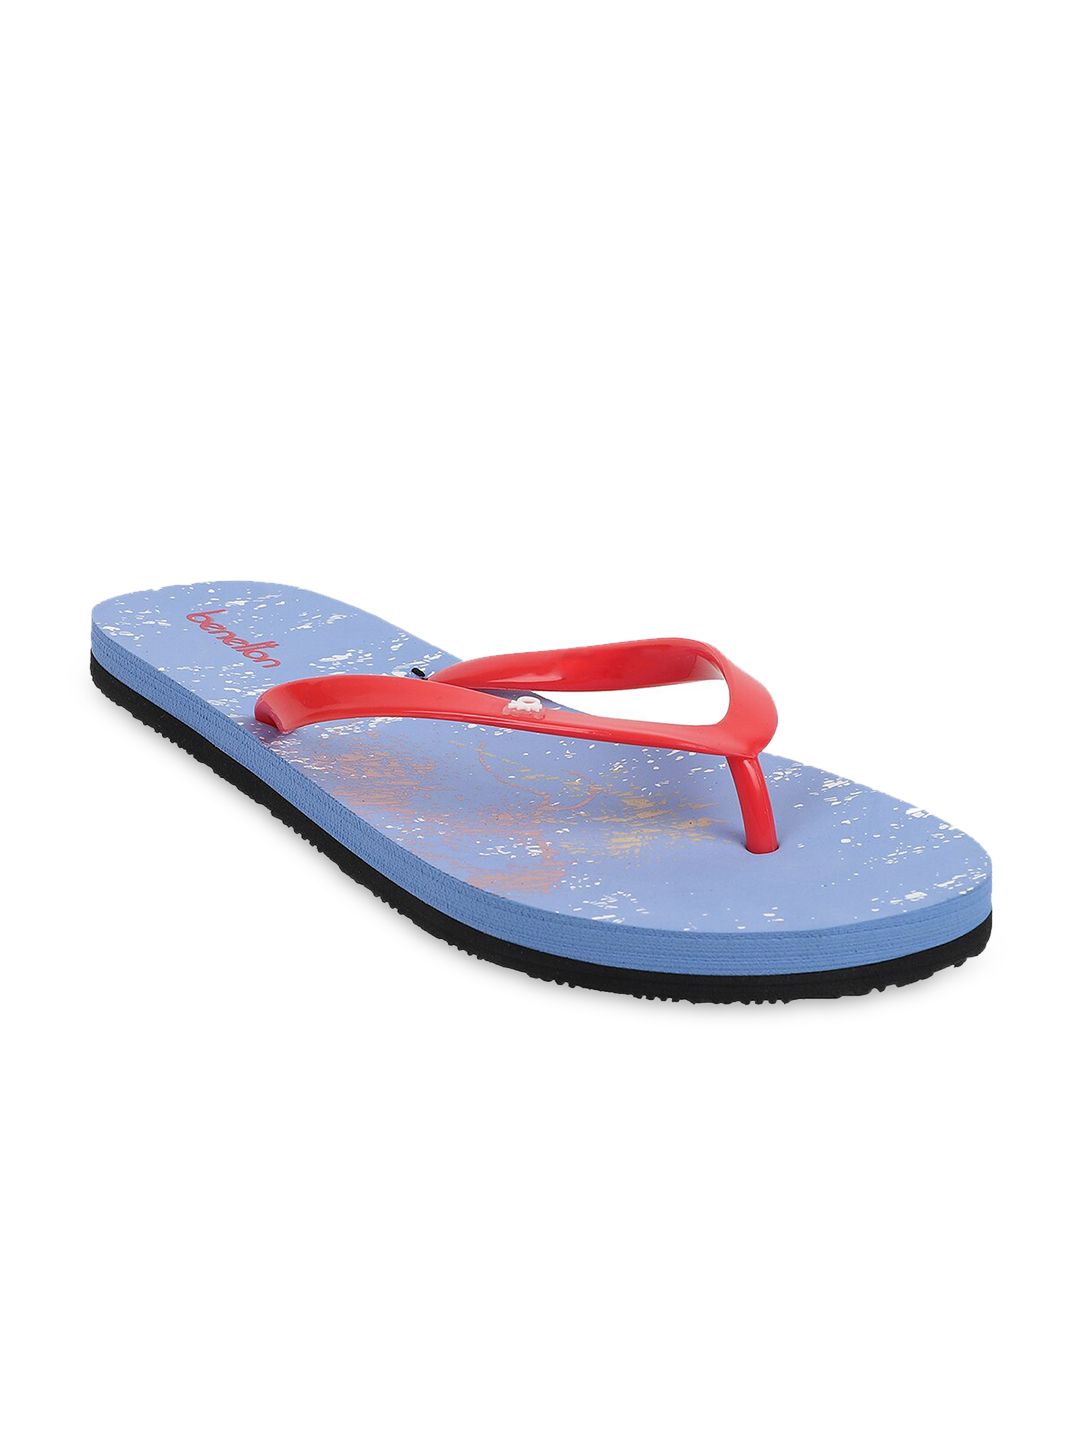 United Colors of Benetton Women Blue & Red Printed Rubber Thong Flip-Flops Price in India